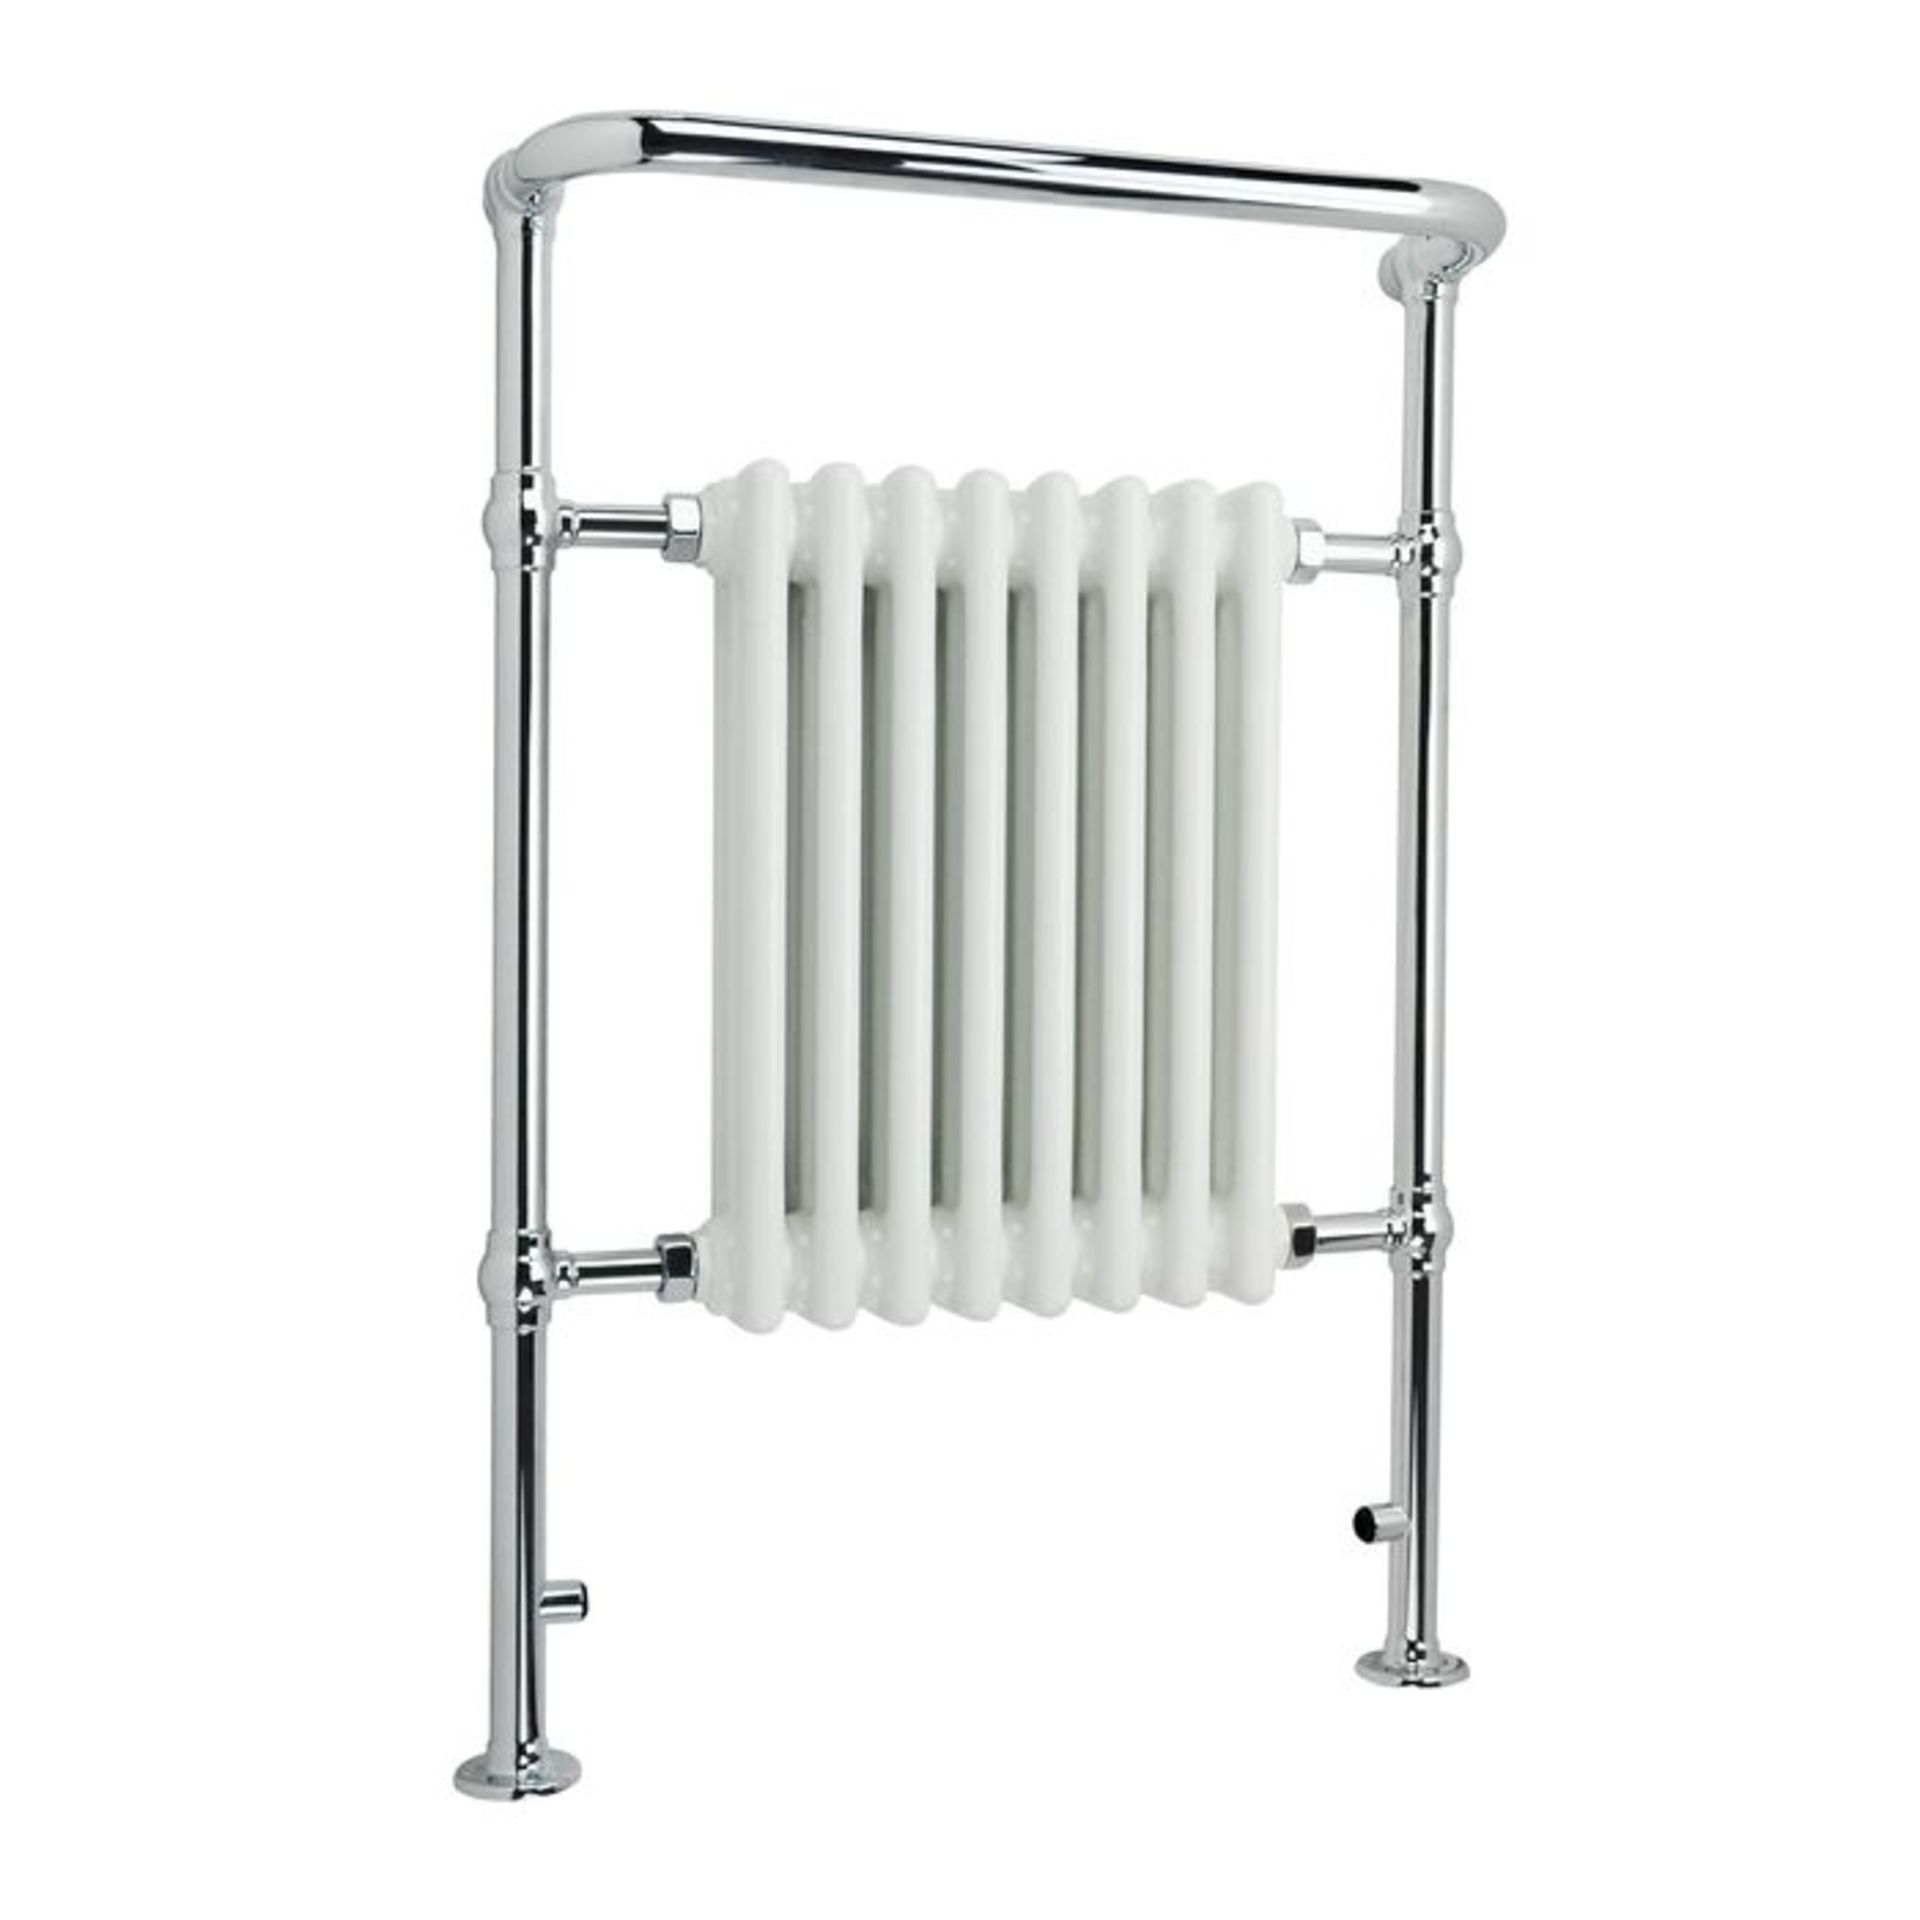 (HM55) 952x659mm Large Traditional White Premium Towel Rail Radiator. We love this because it ... - Image 3 of 3